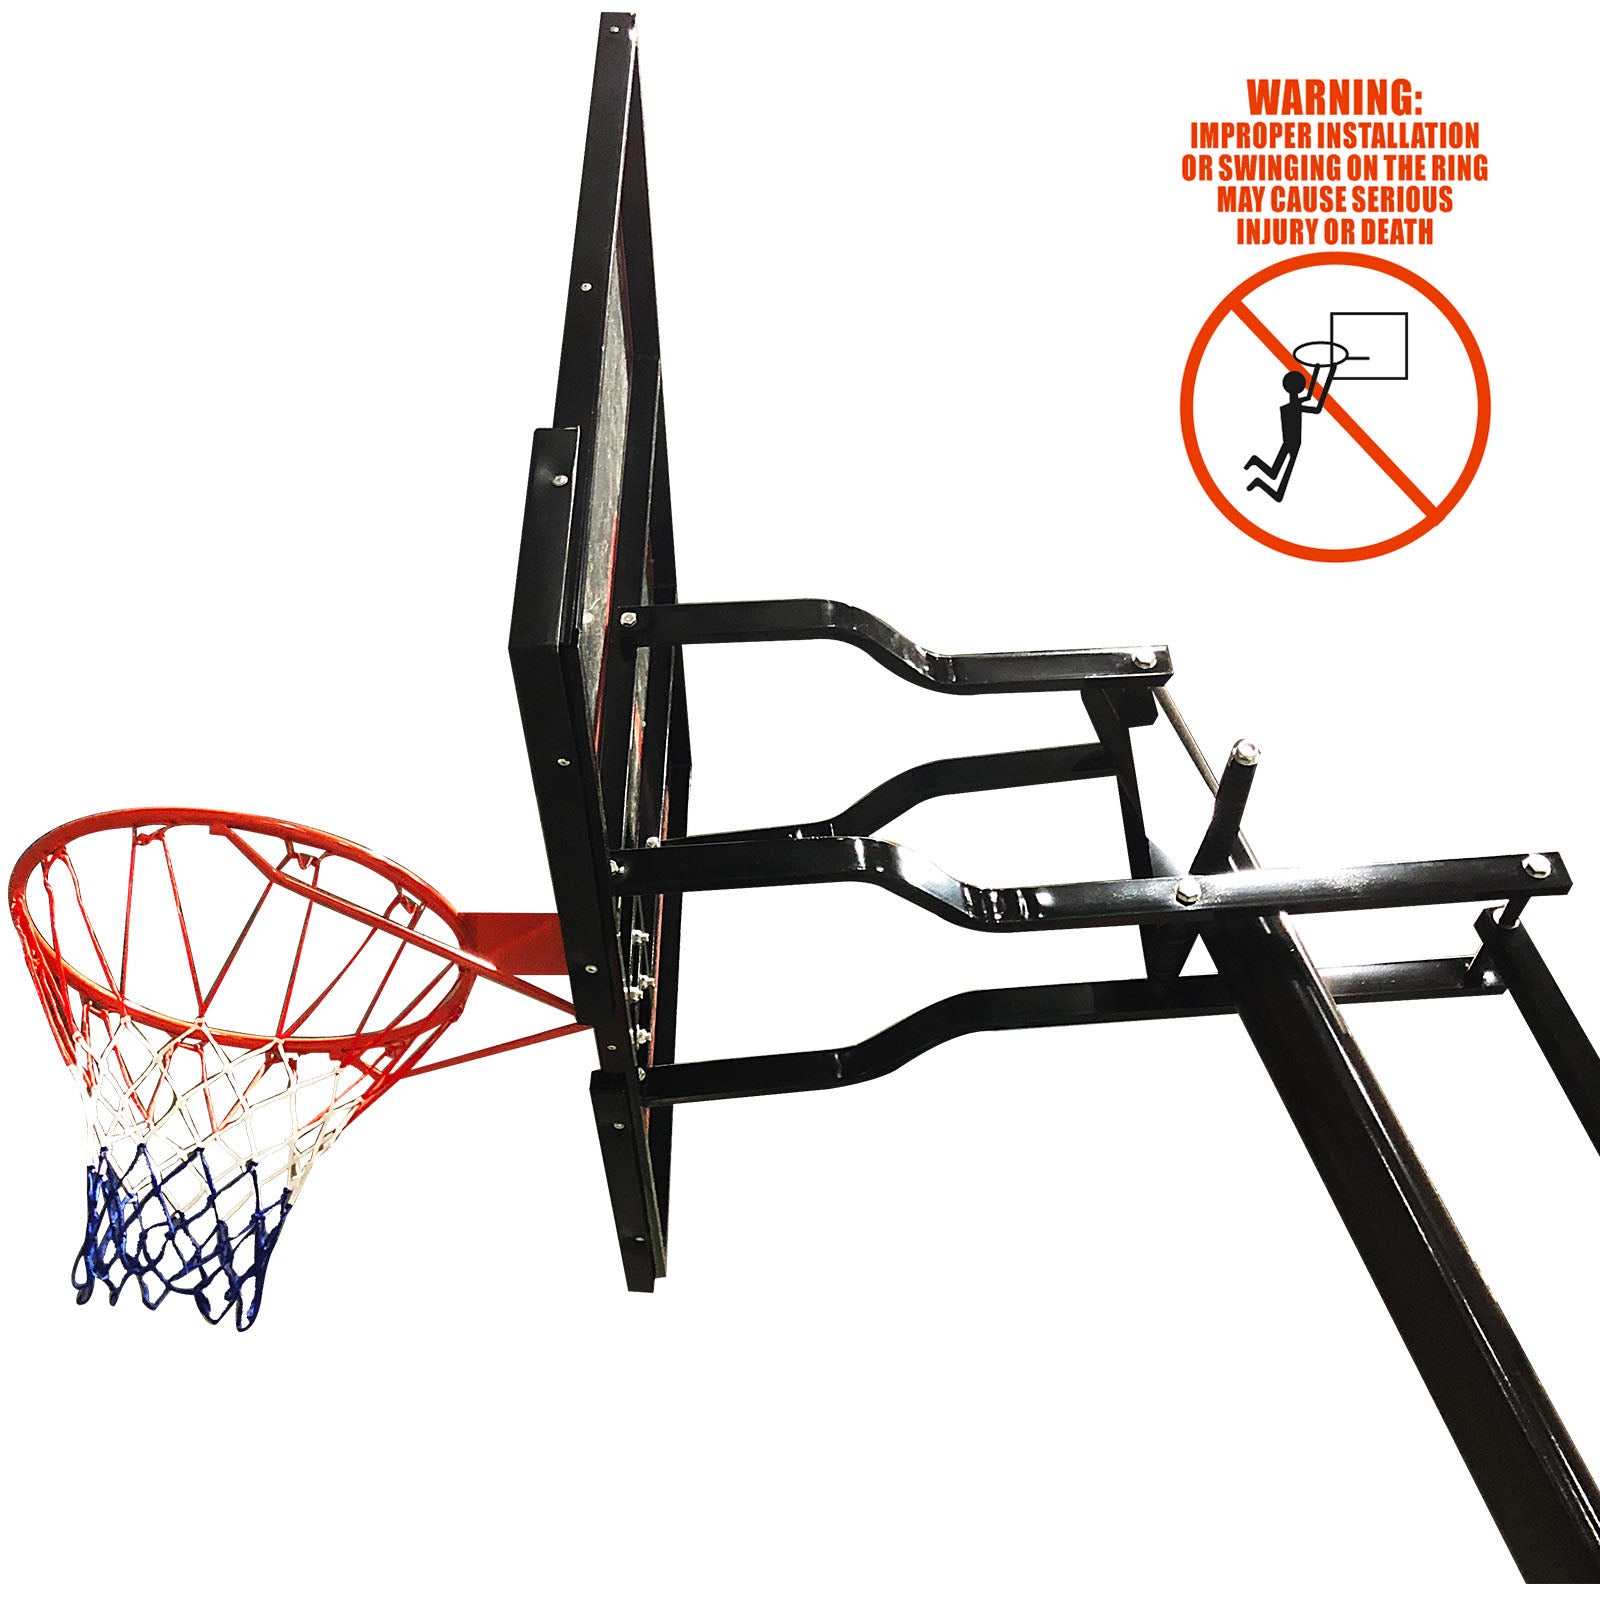 Xtreetball Basketball Hoop Stand System-X024 3.05M